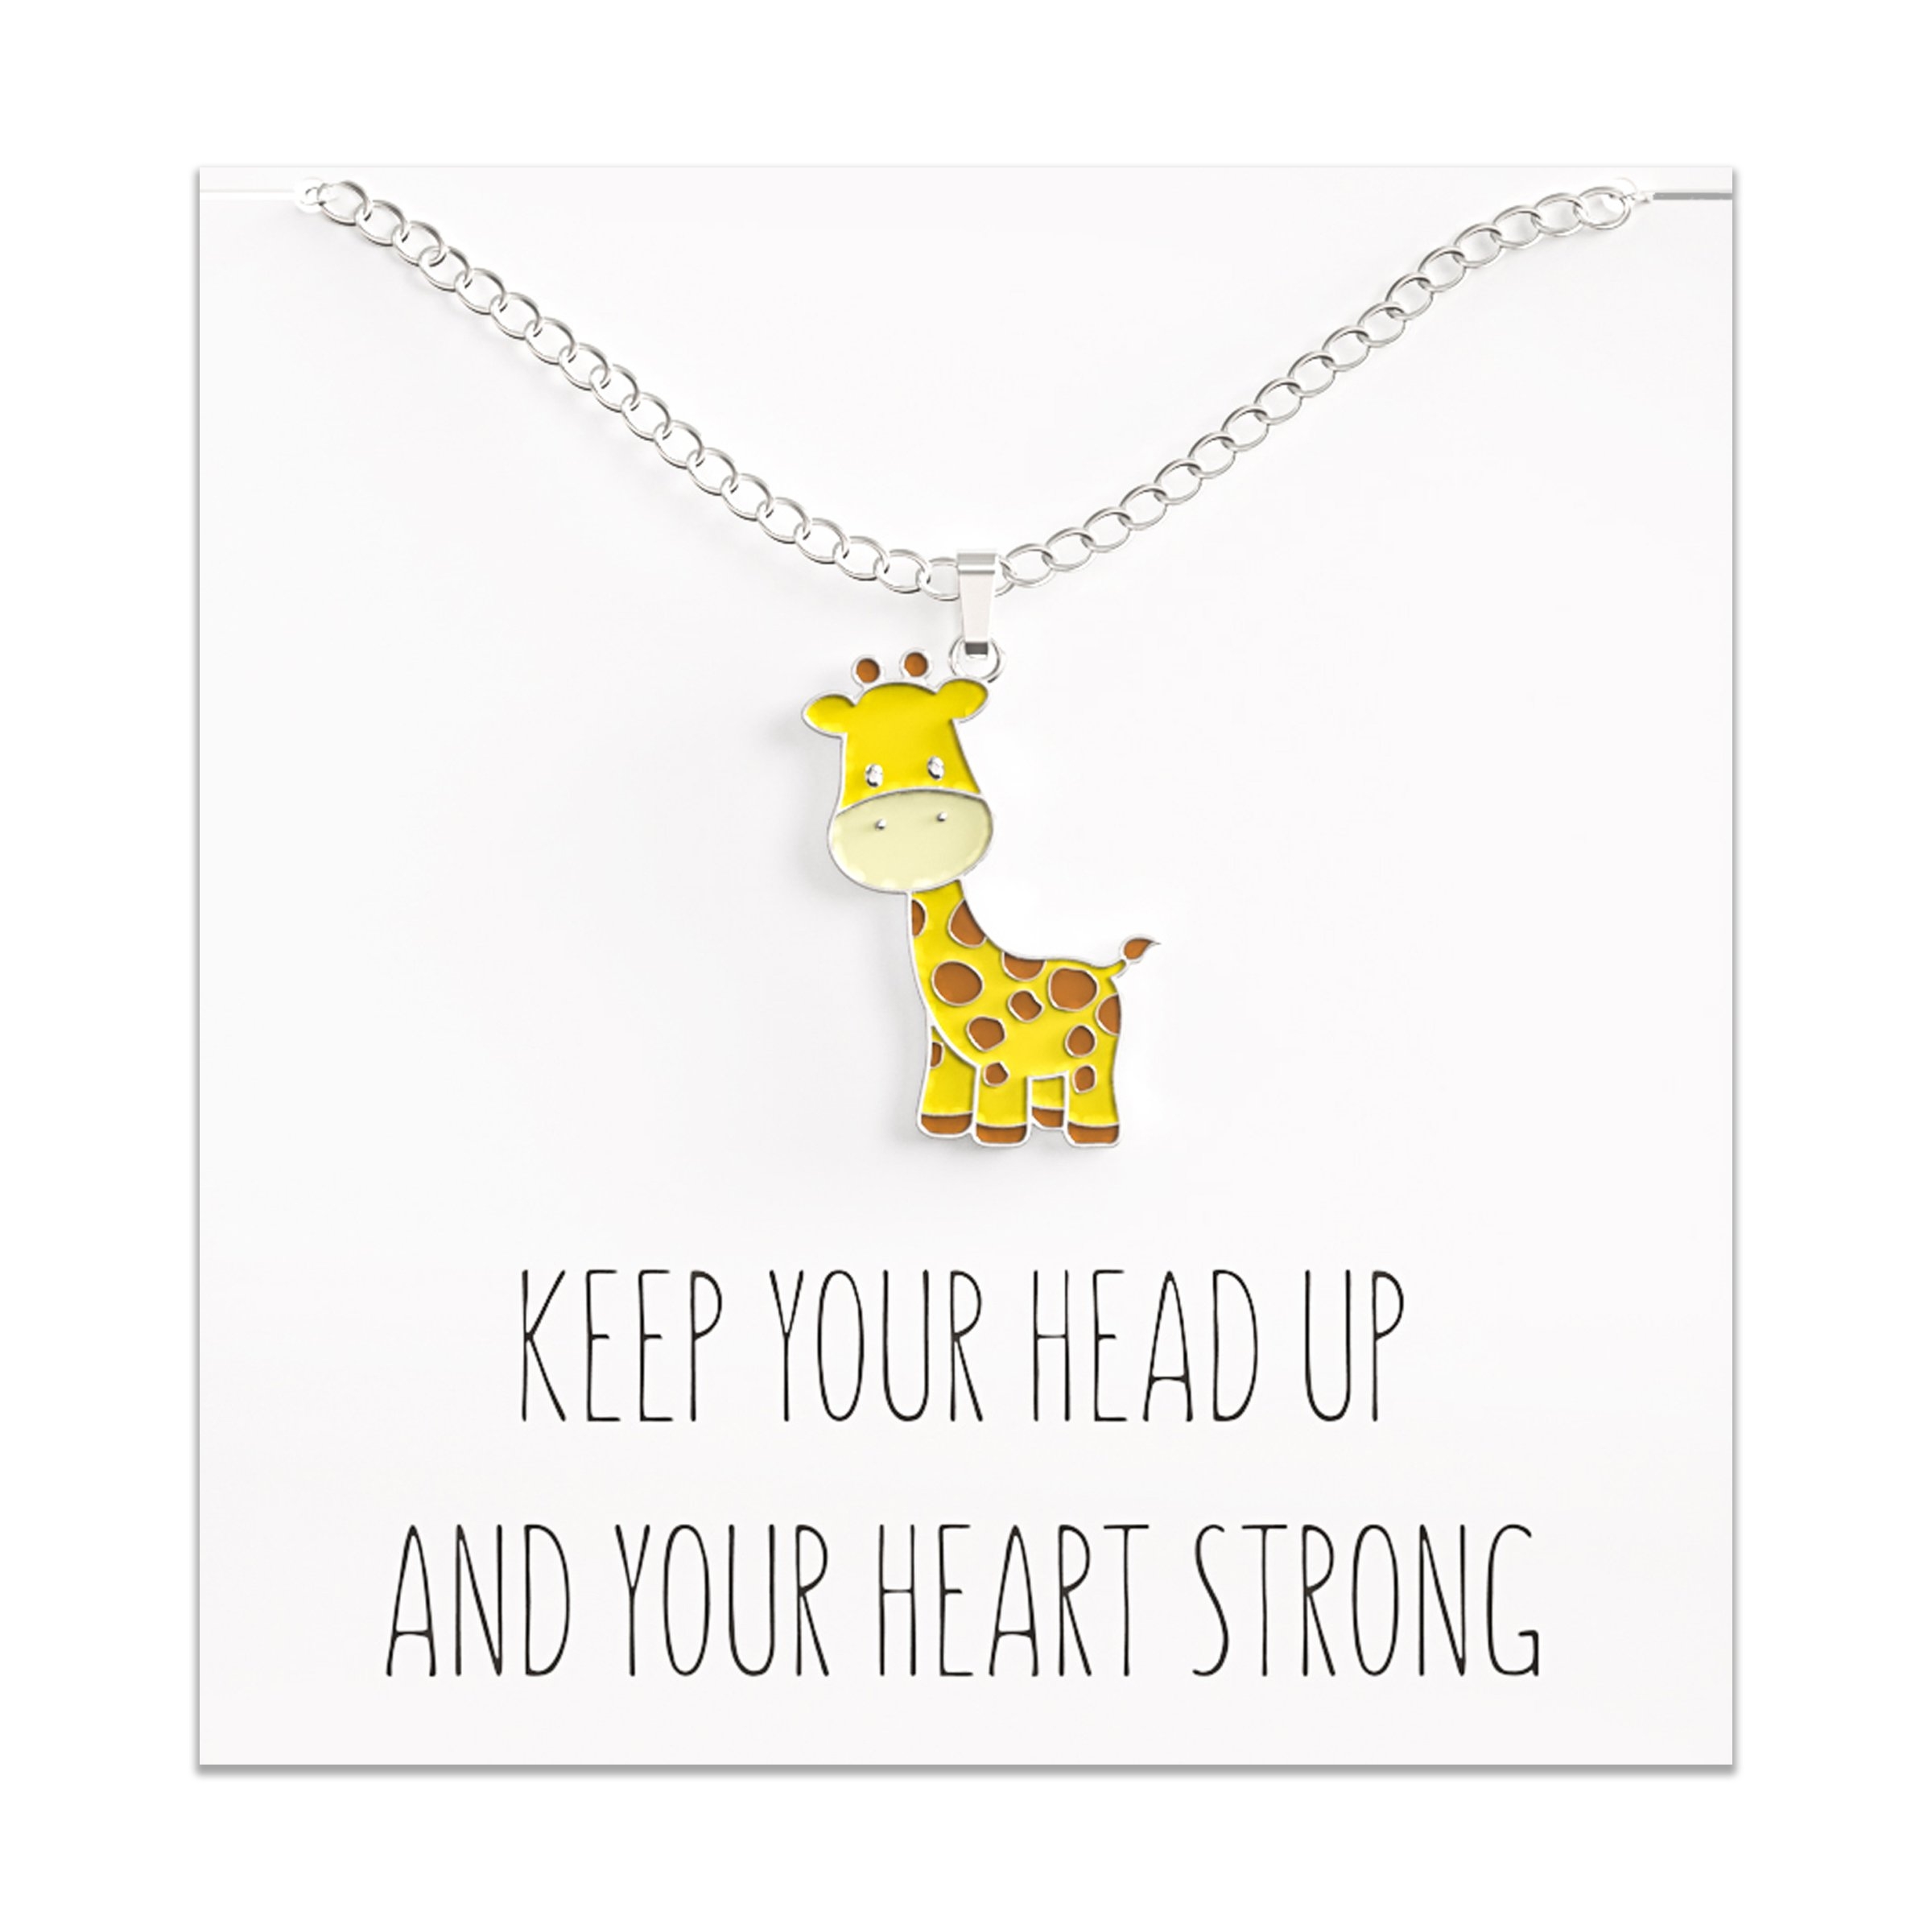 Cute Giraffe Necklace Kids Charm With Inspirational Card Gifts For Girls & Teens – Happy Kisses